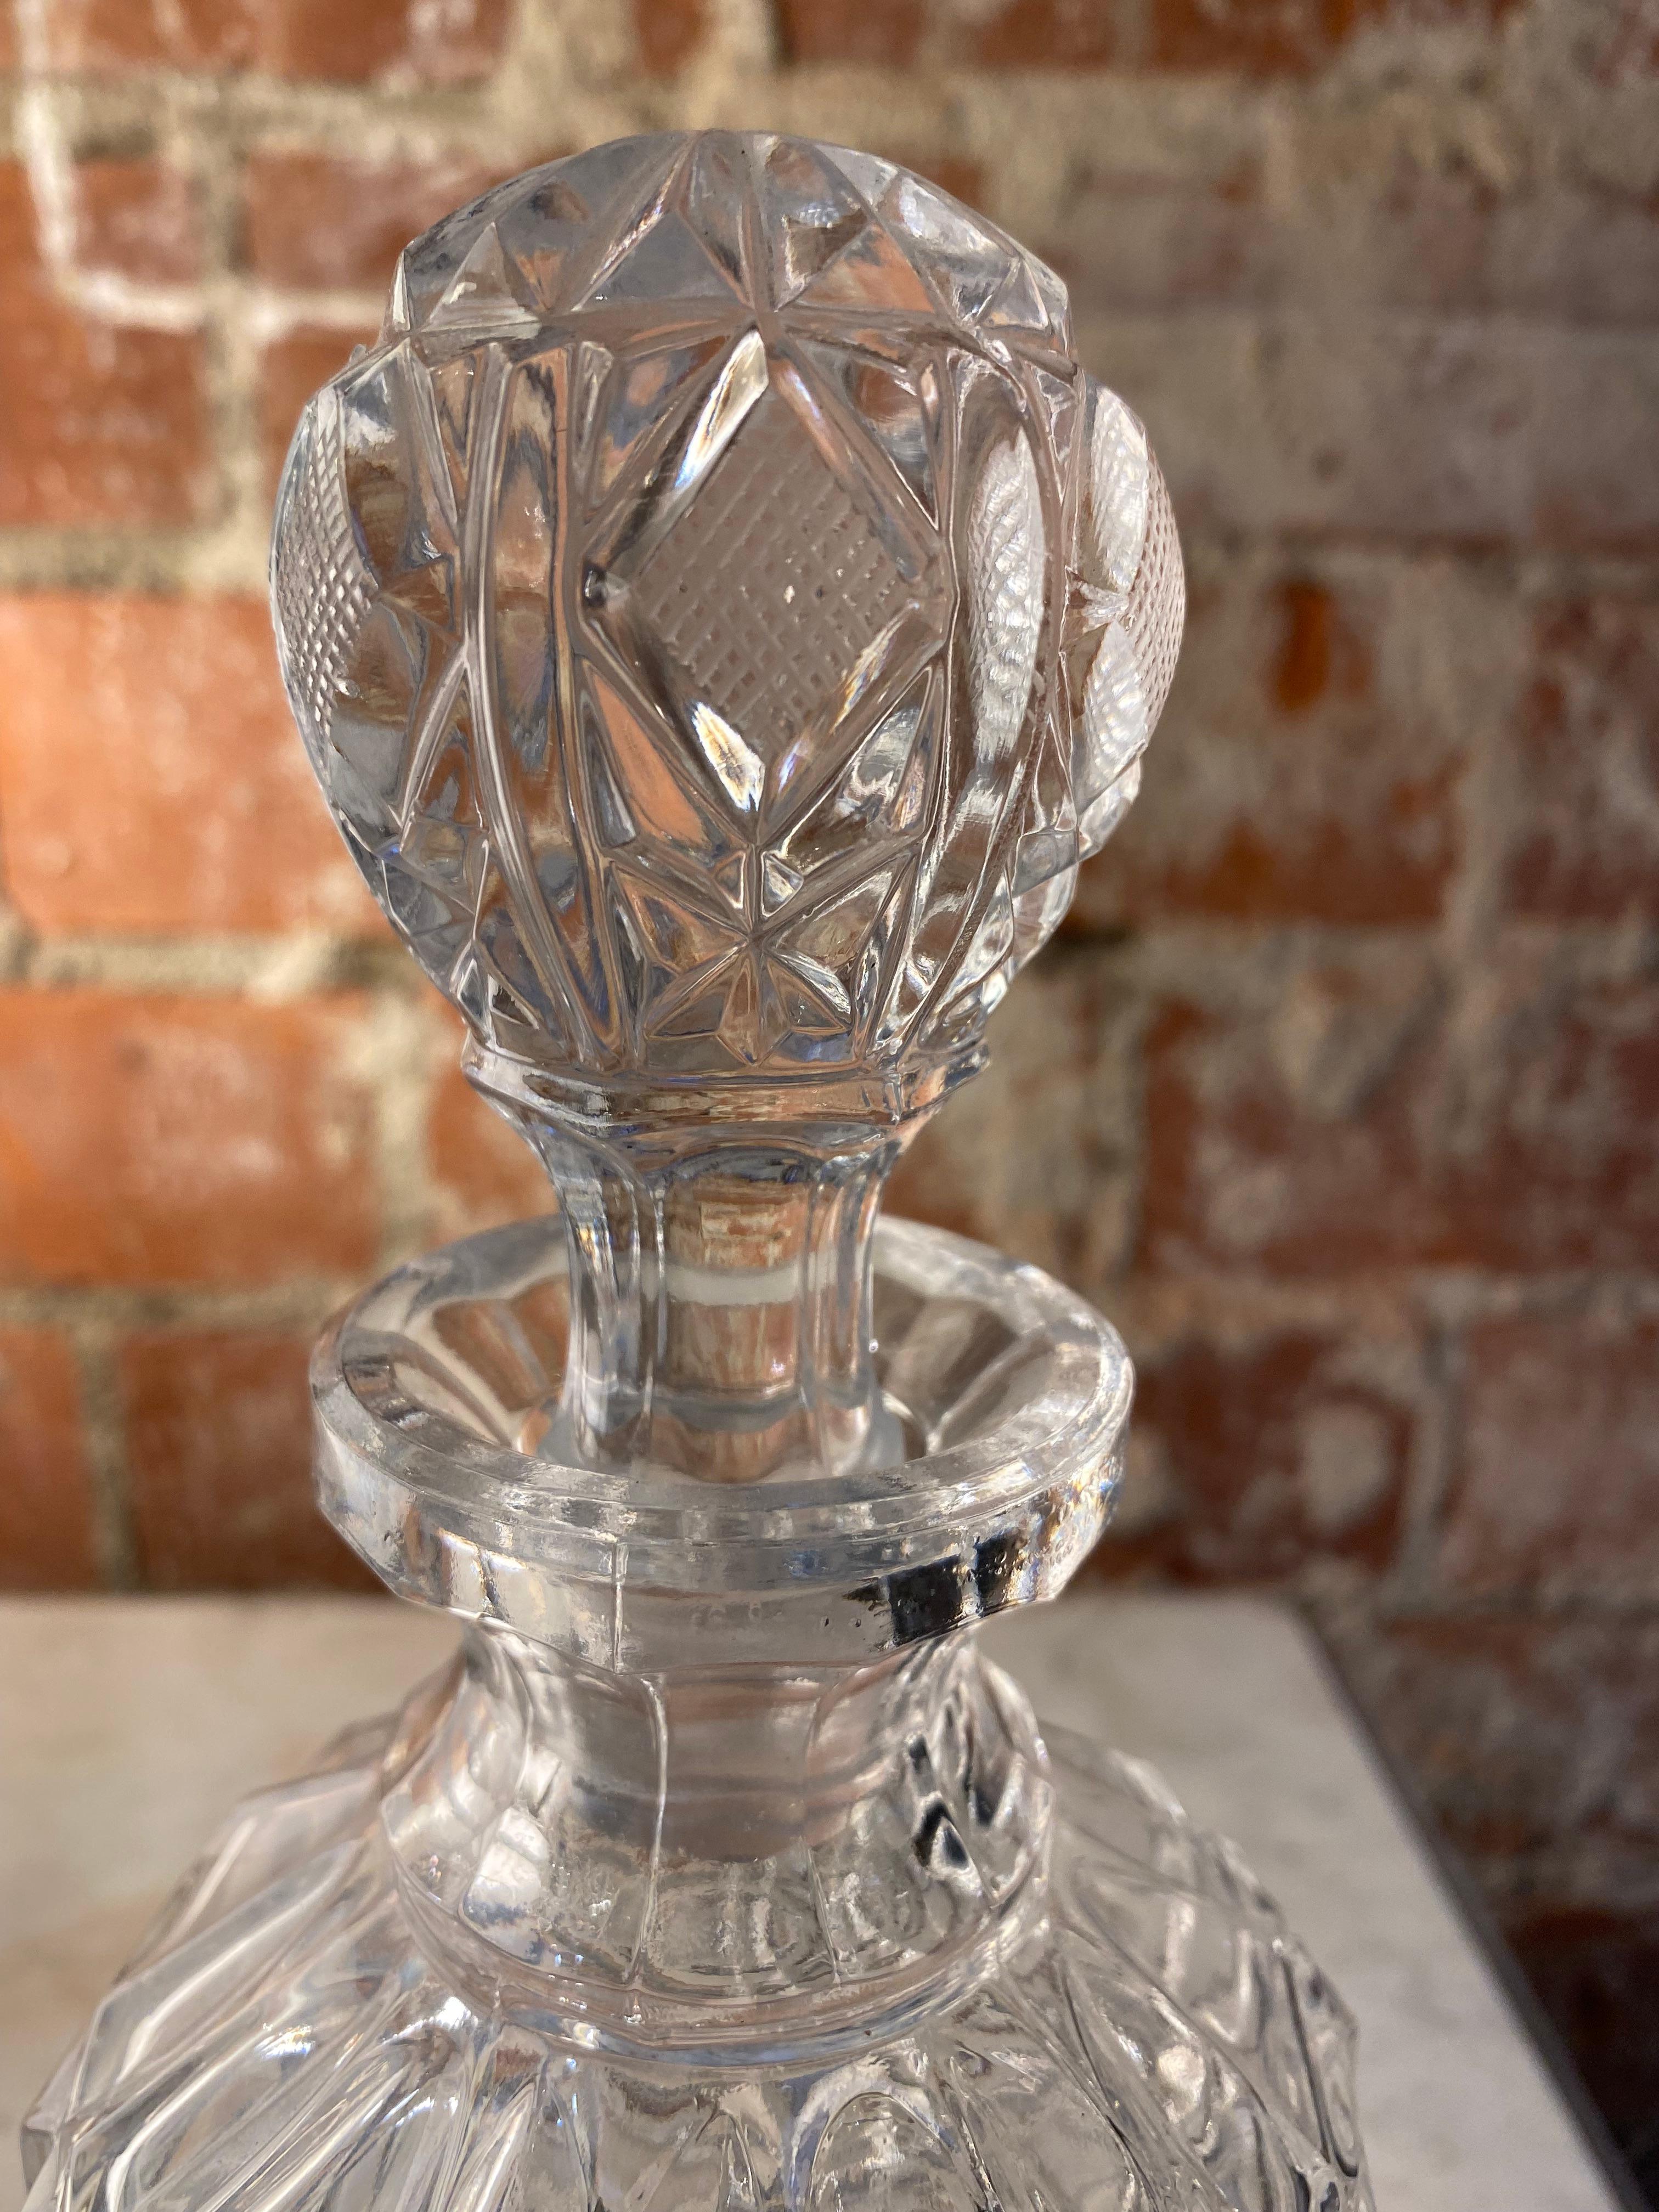 Mid-20th Century Decorative Italian Decanterbottle Made with Crystal, 1950s For Sale